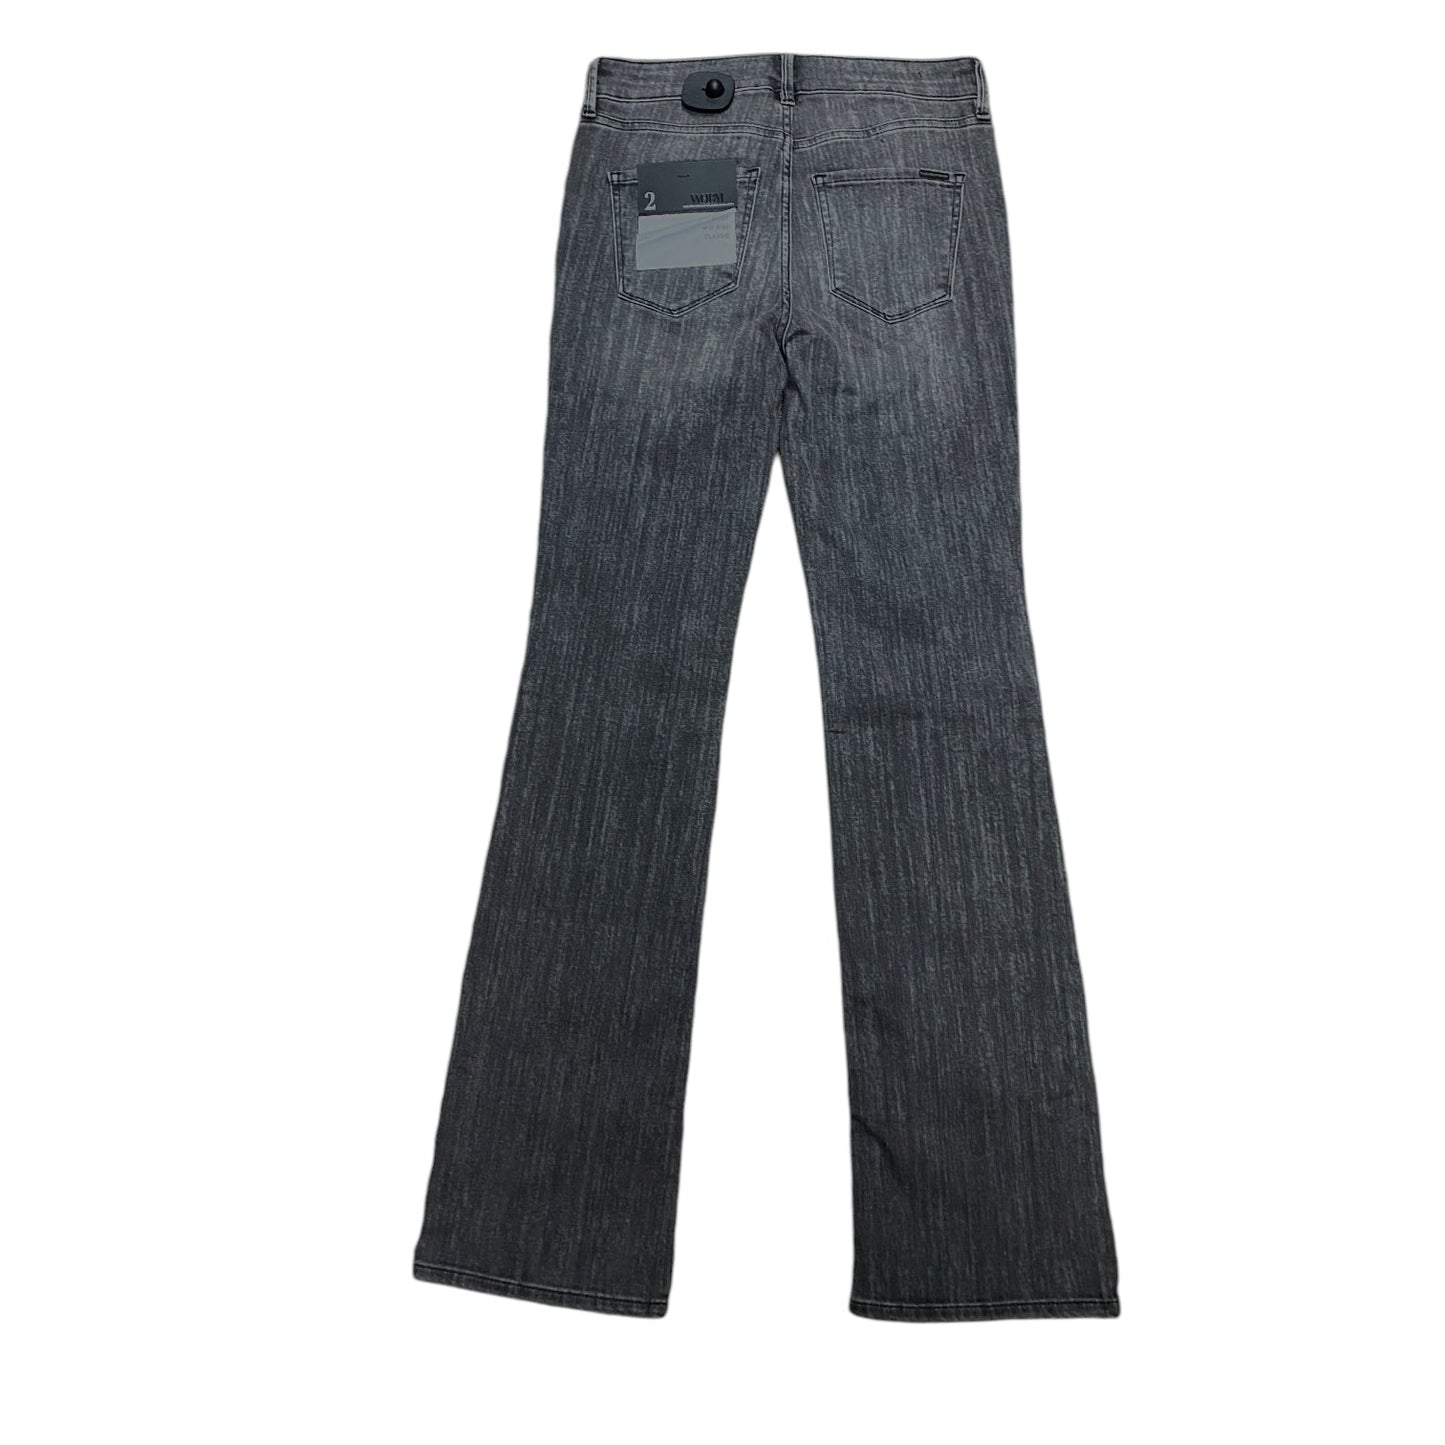 Jeans Boot Cut By White House Black Market  Size: 2